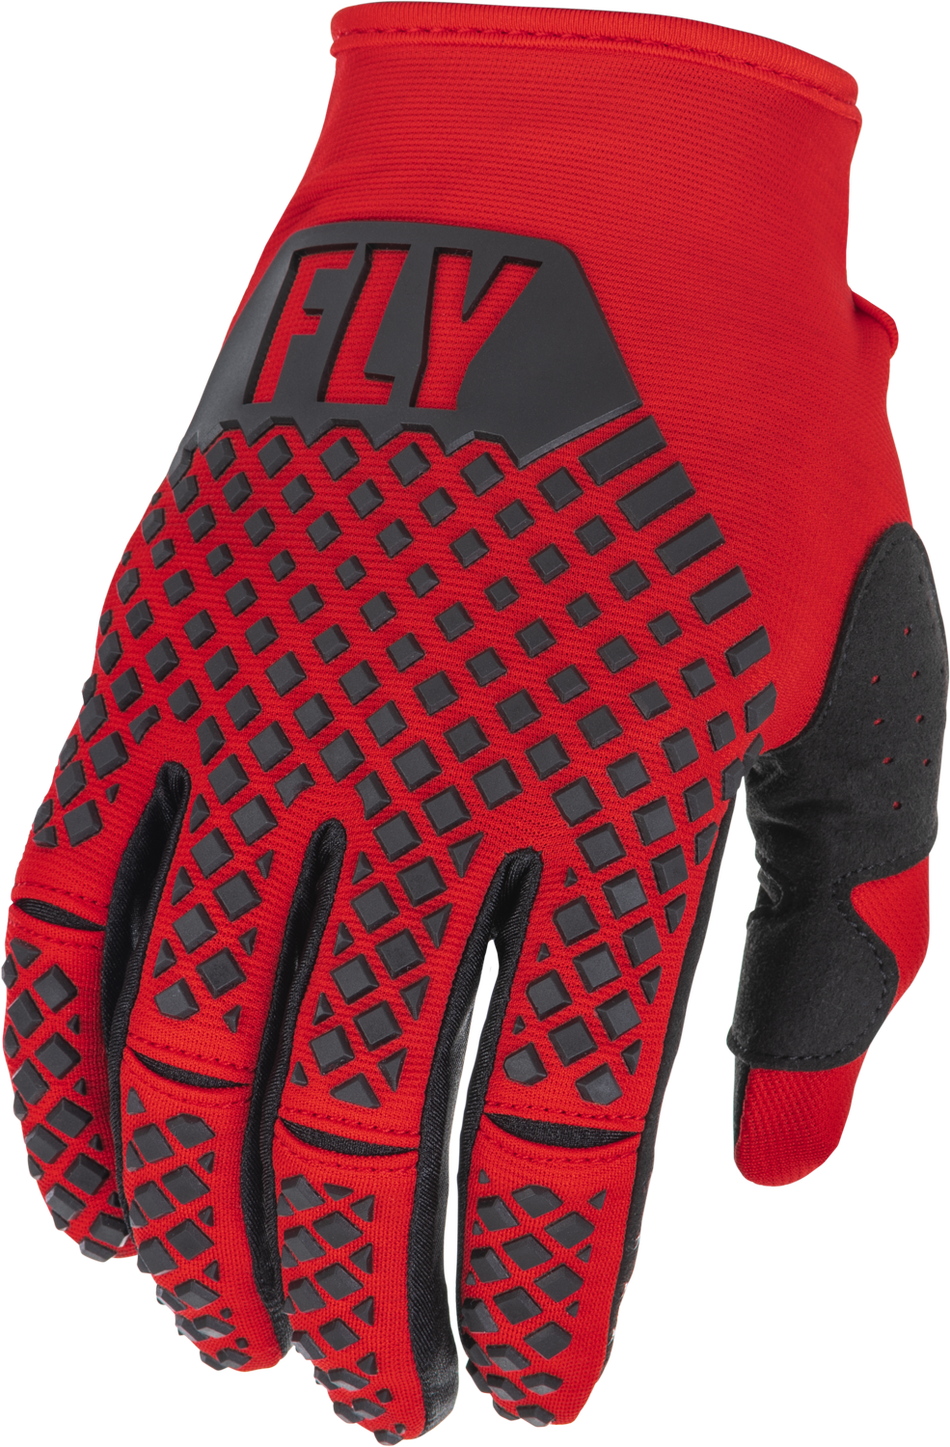 FLY RACING Kinetic Gloves Red/Black Xs 375-413XS